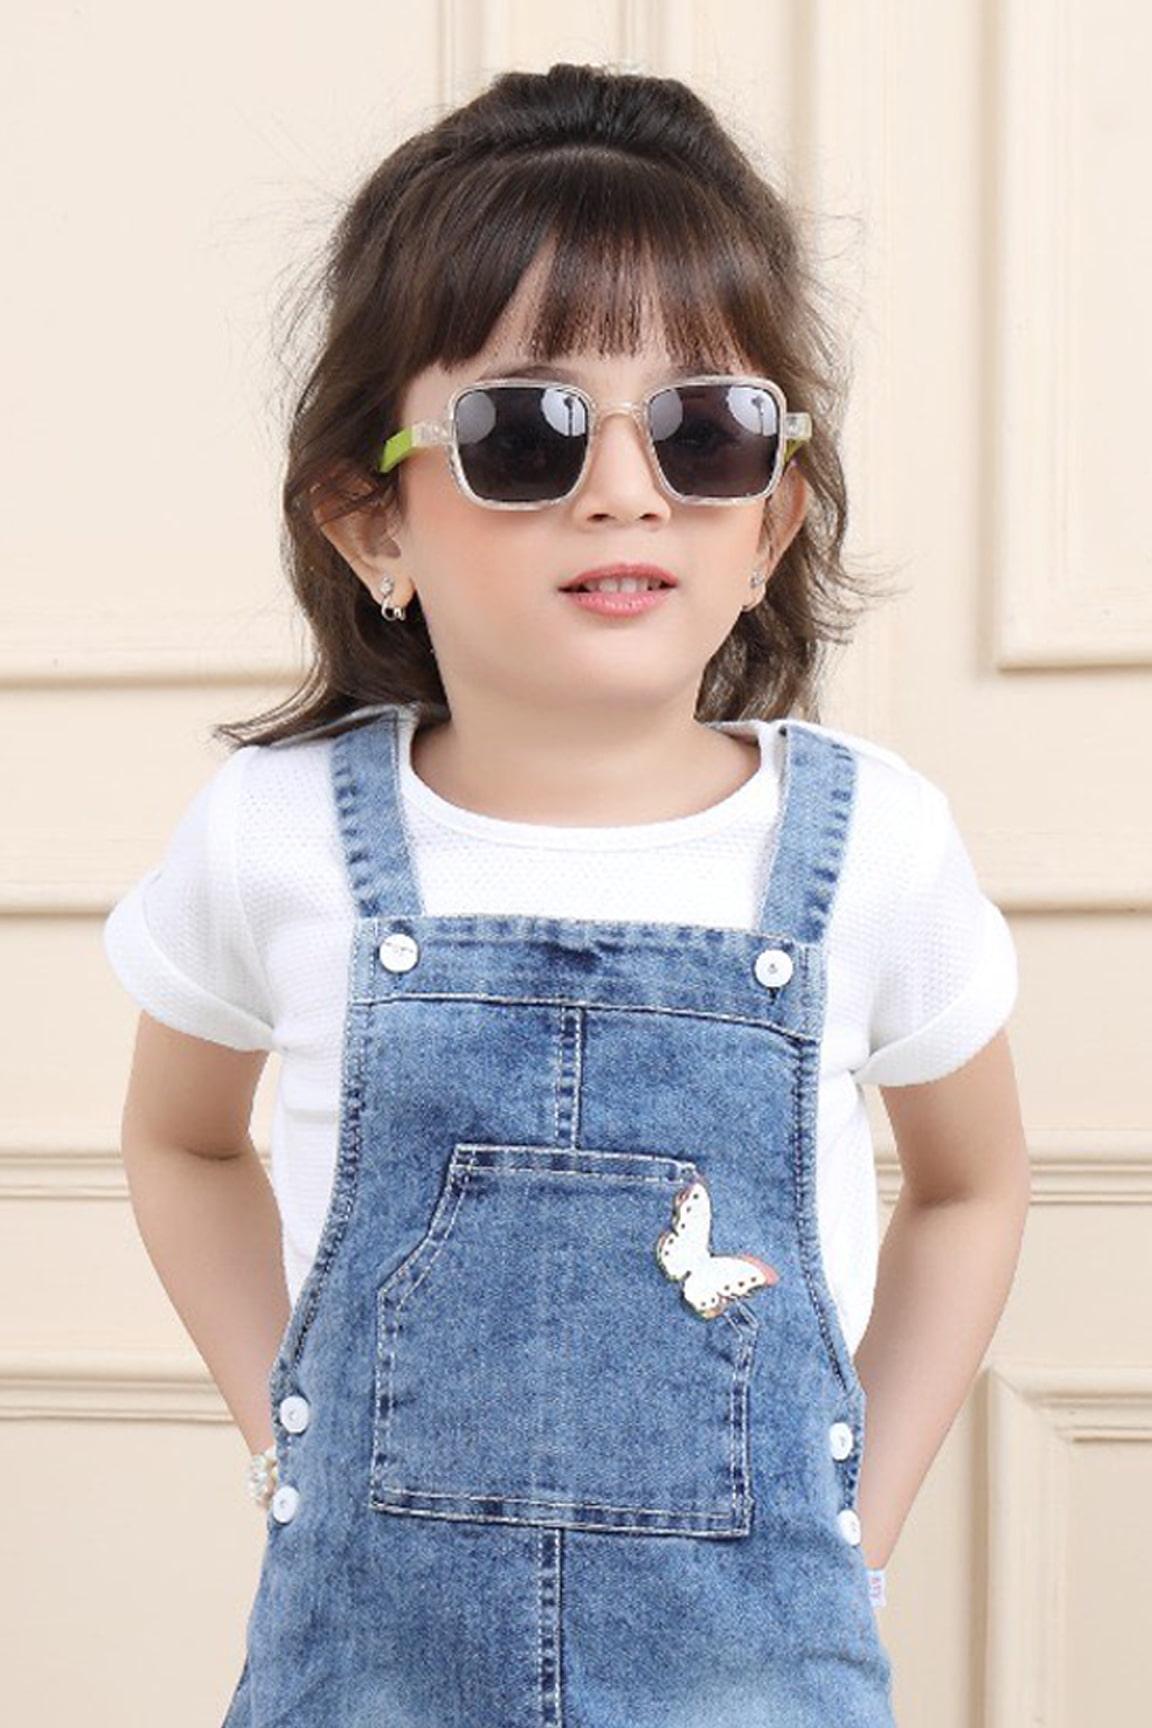 MPC Cute Fashion Kids Baby Girl Dress Infant Jeans Dungaree Jumpsuit for  6-12 Months (Blue)